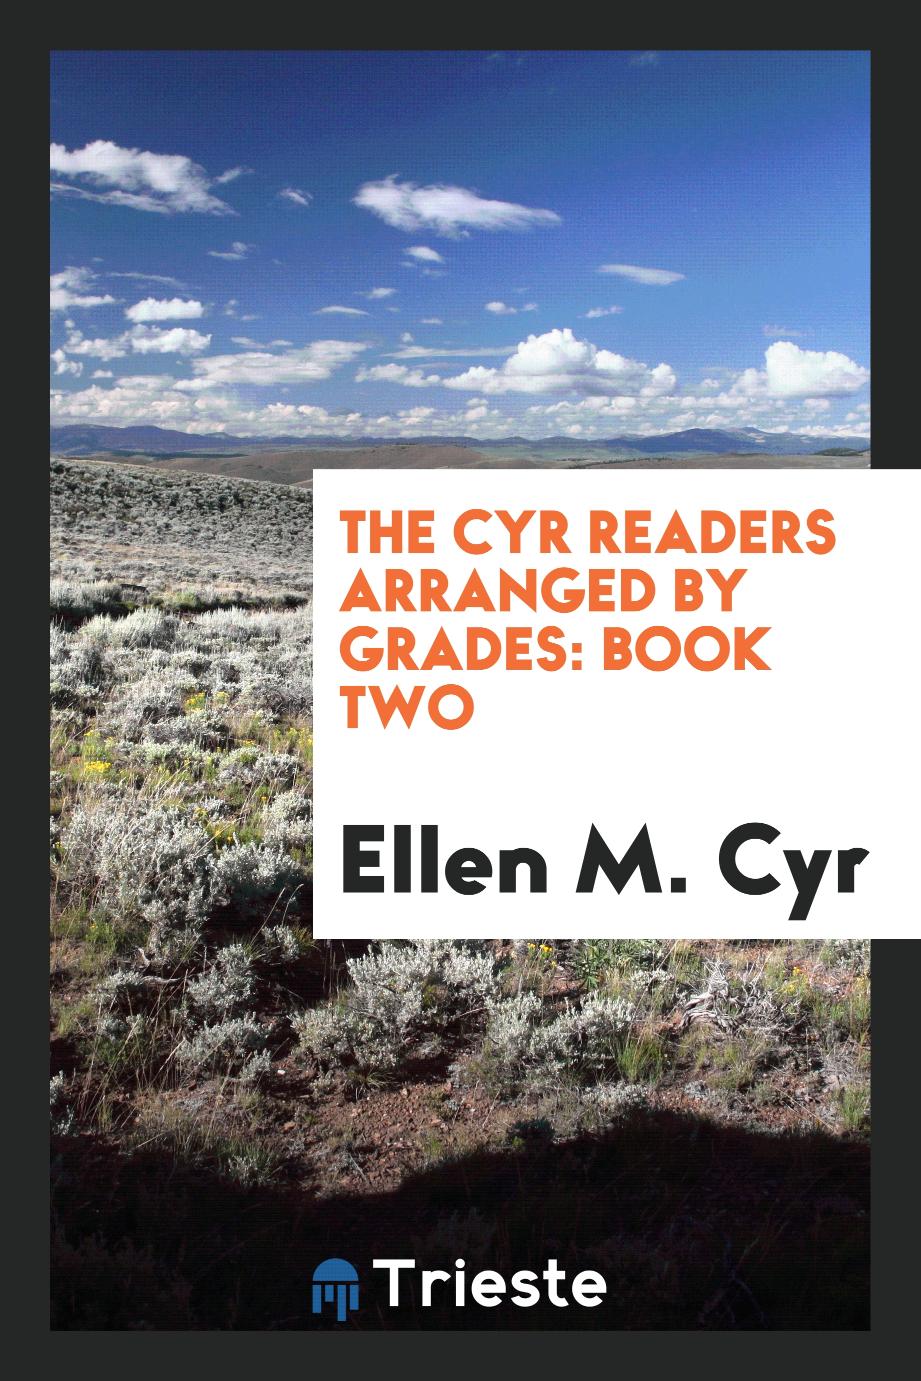 The Cyr Readers Arranged by Grades: Book Two